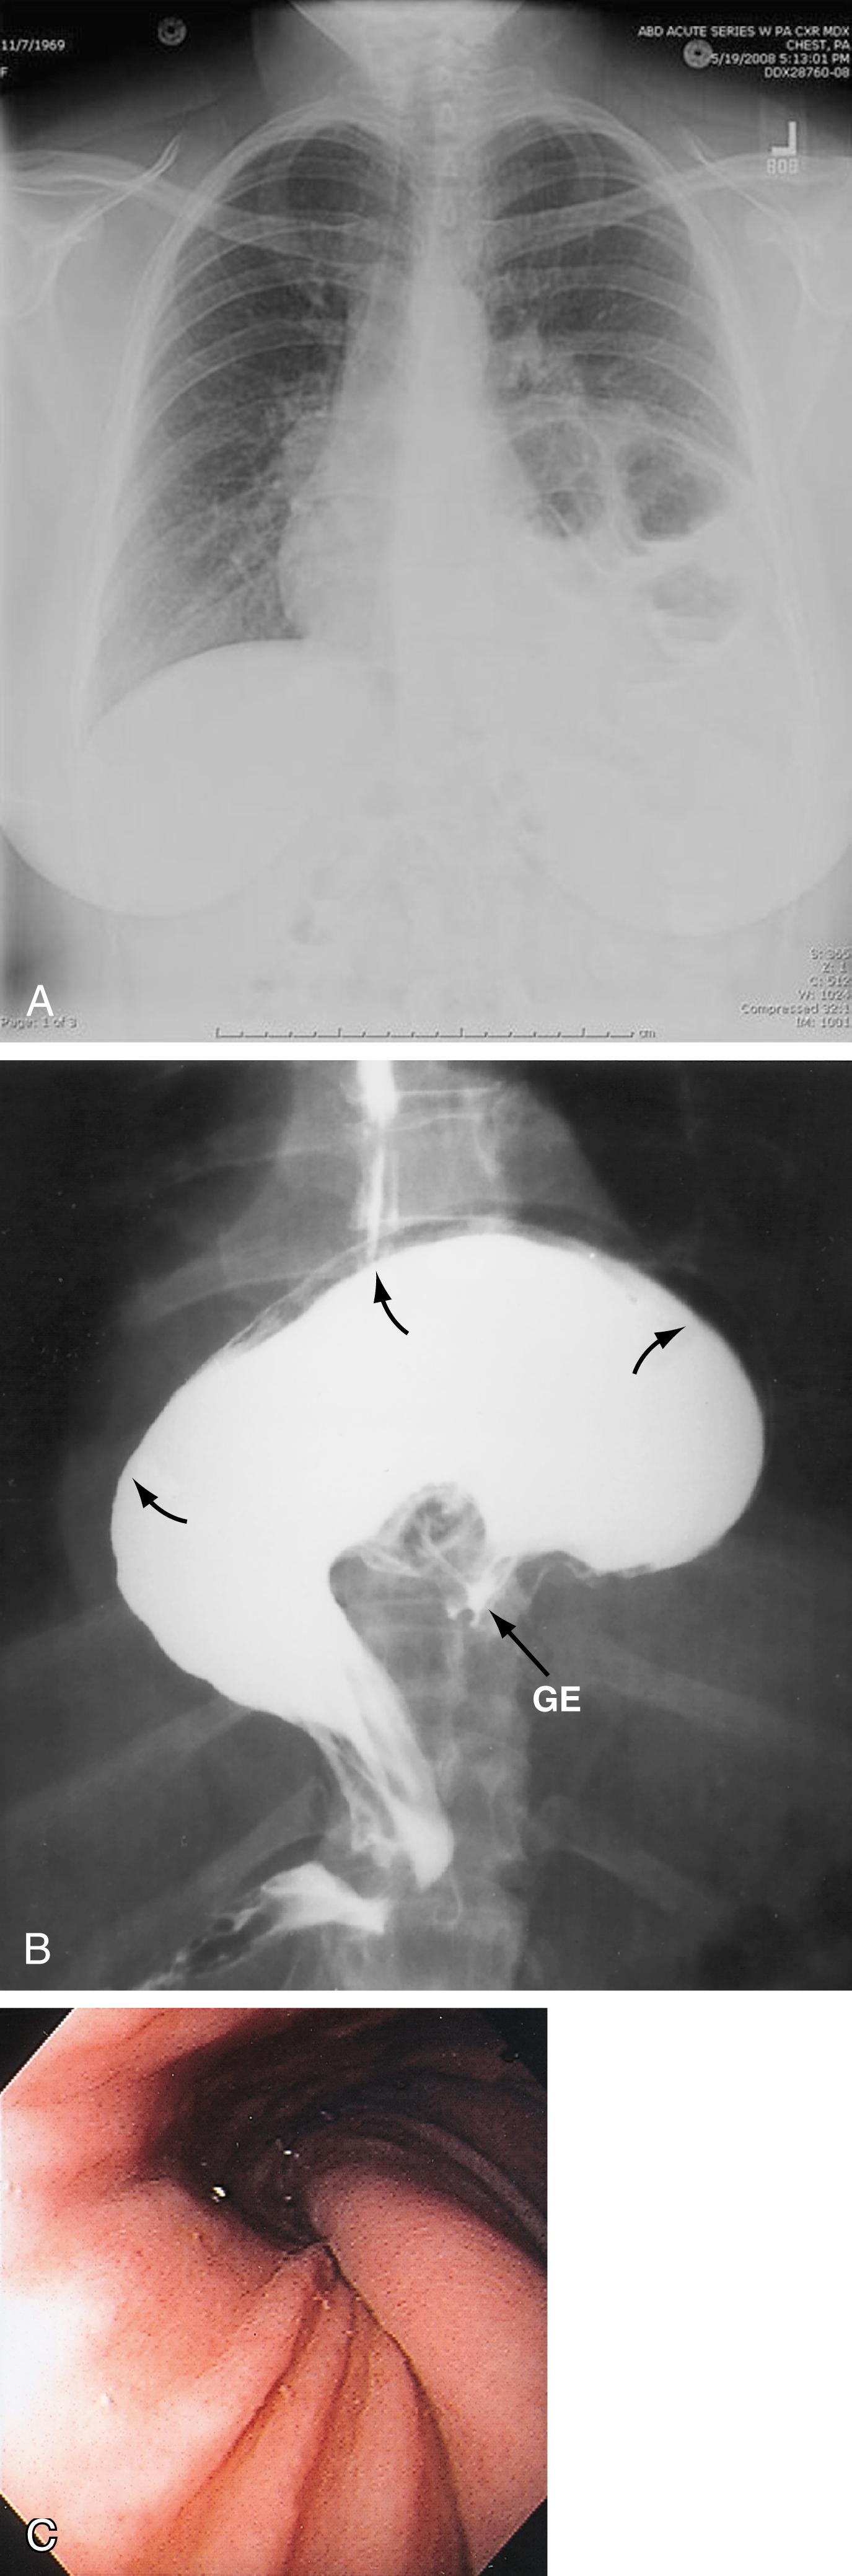 Fig. 27.6, Gastric volvulus with paraesophageal hernia. A, Chest film showing a gas-filled mediastinal mass. B, Barium examination showing that the greater curvature and lesser curvature of the stomach are reversed in position (upside-down stomach). C, Twisting of the gastric folds at the point of torsion is noted in this endoscopic view of a gastric volvulus.